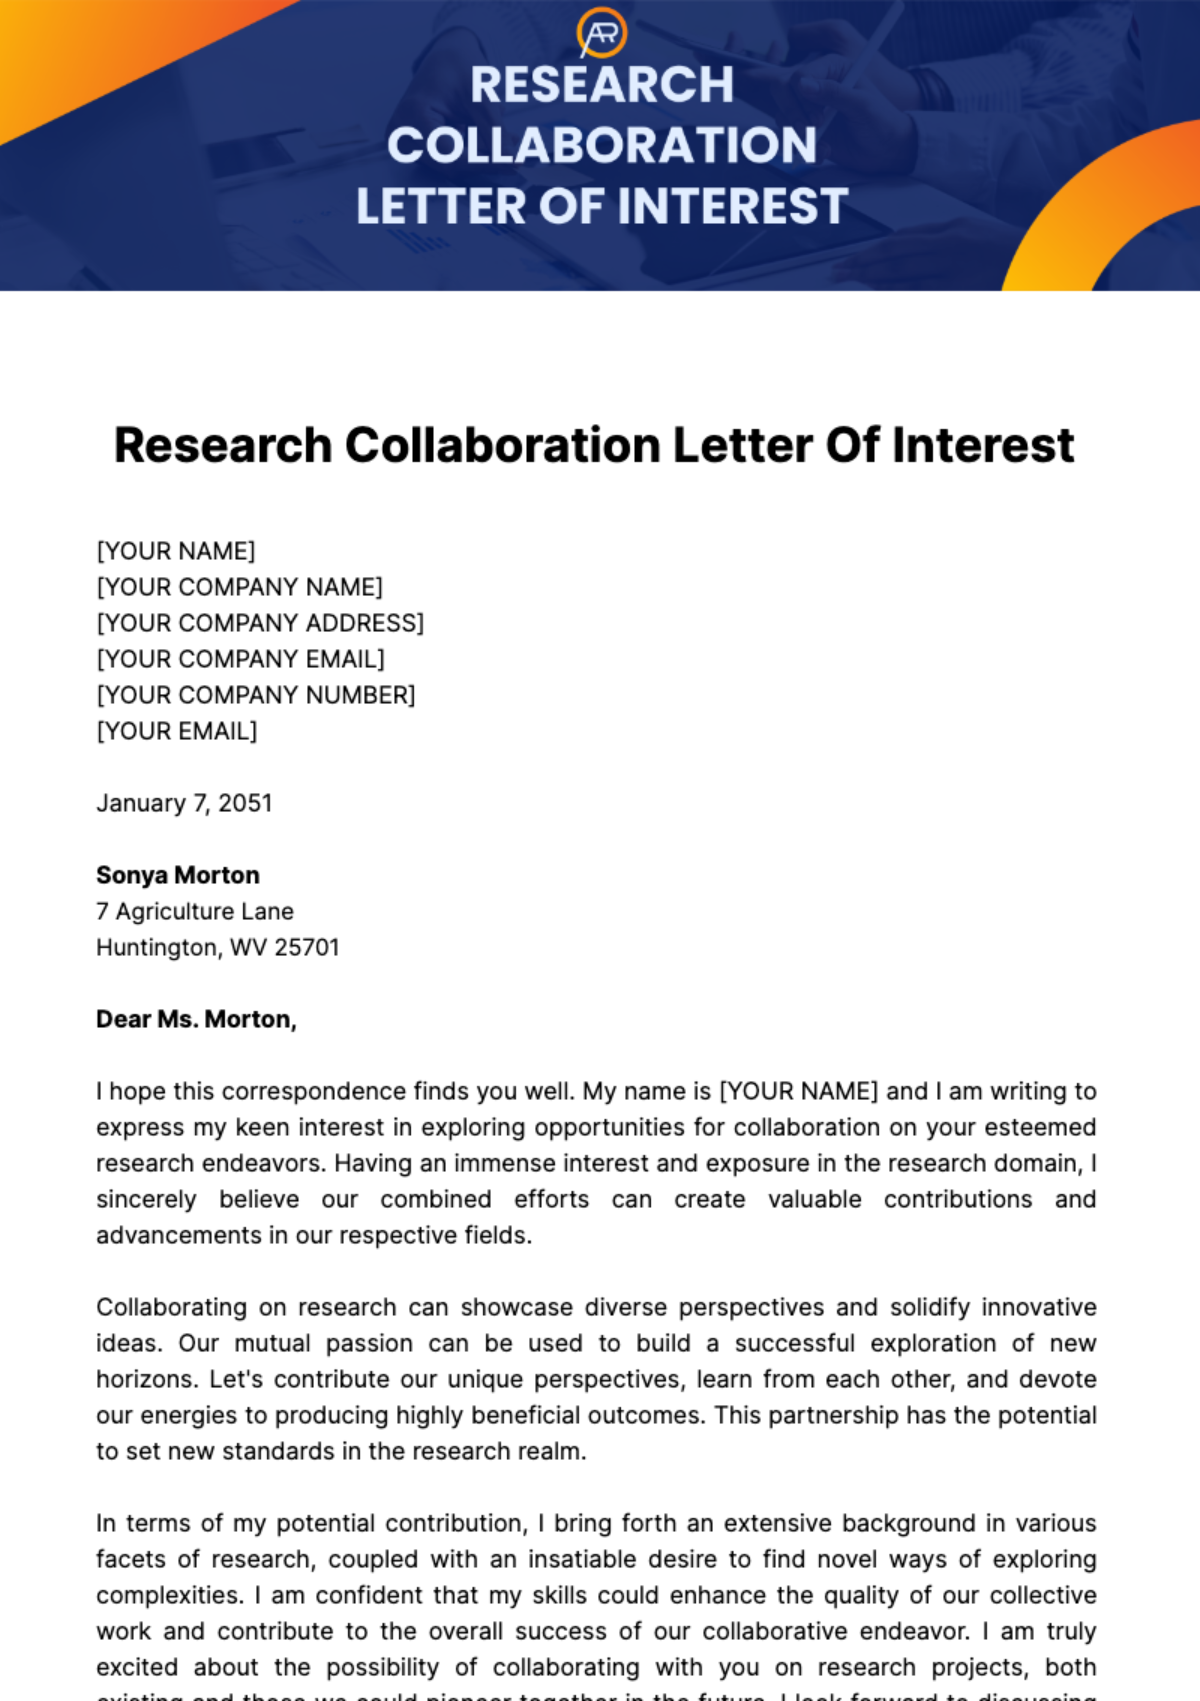 Research Collaboration Letter of Interest Template